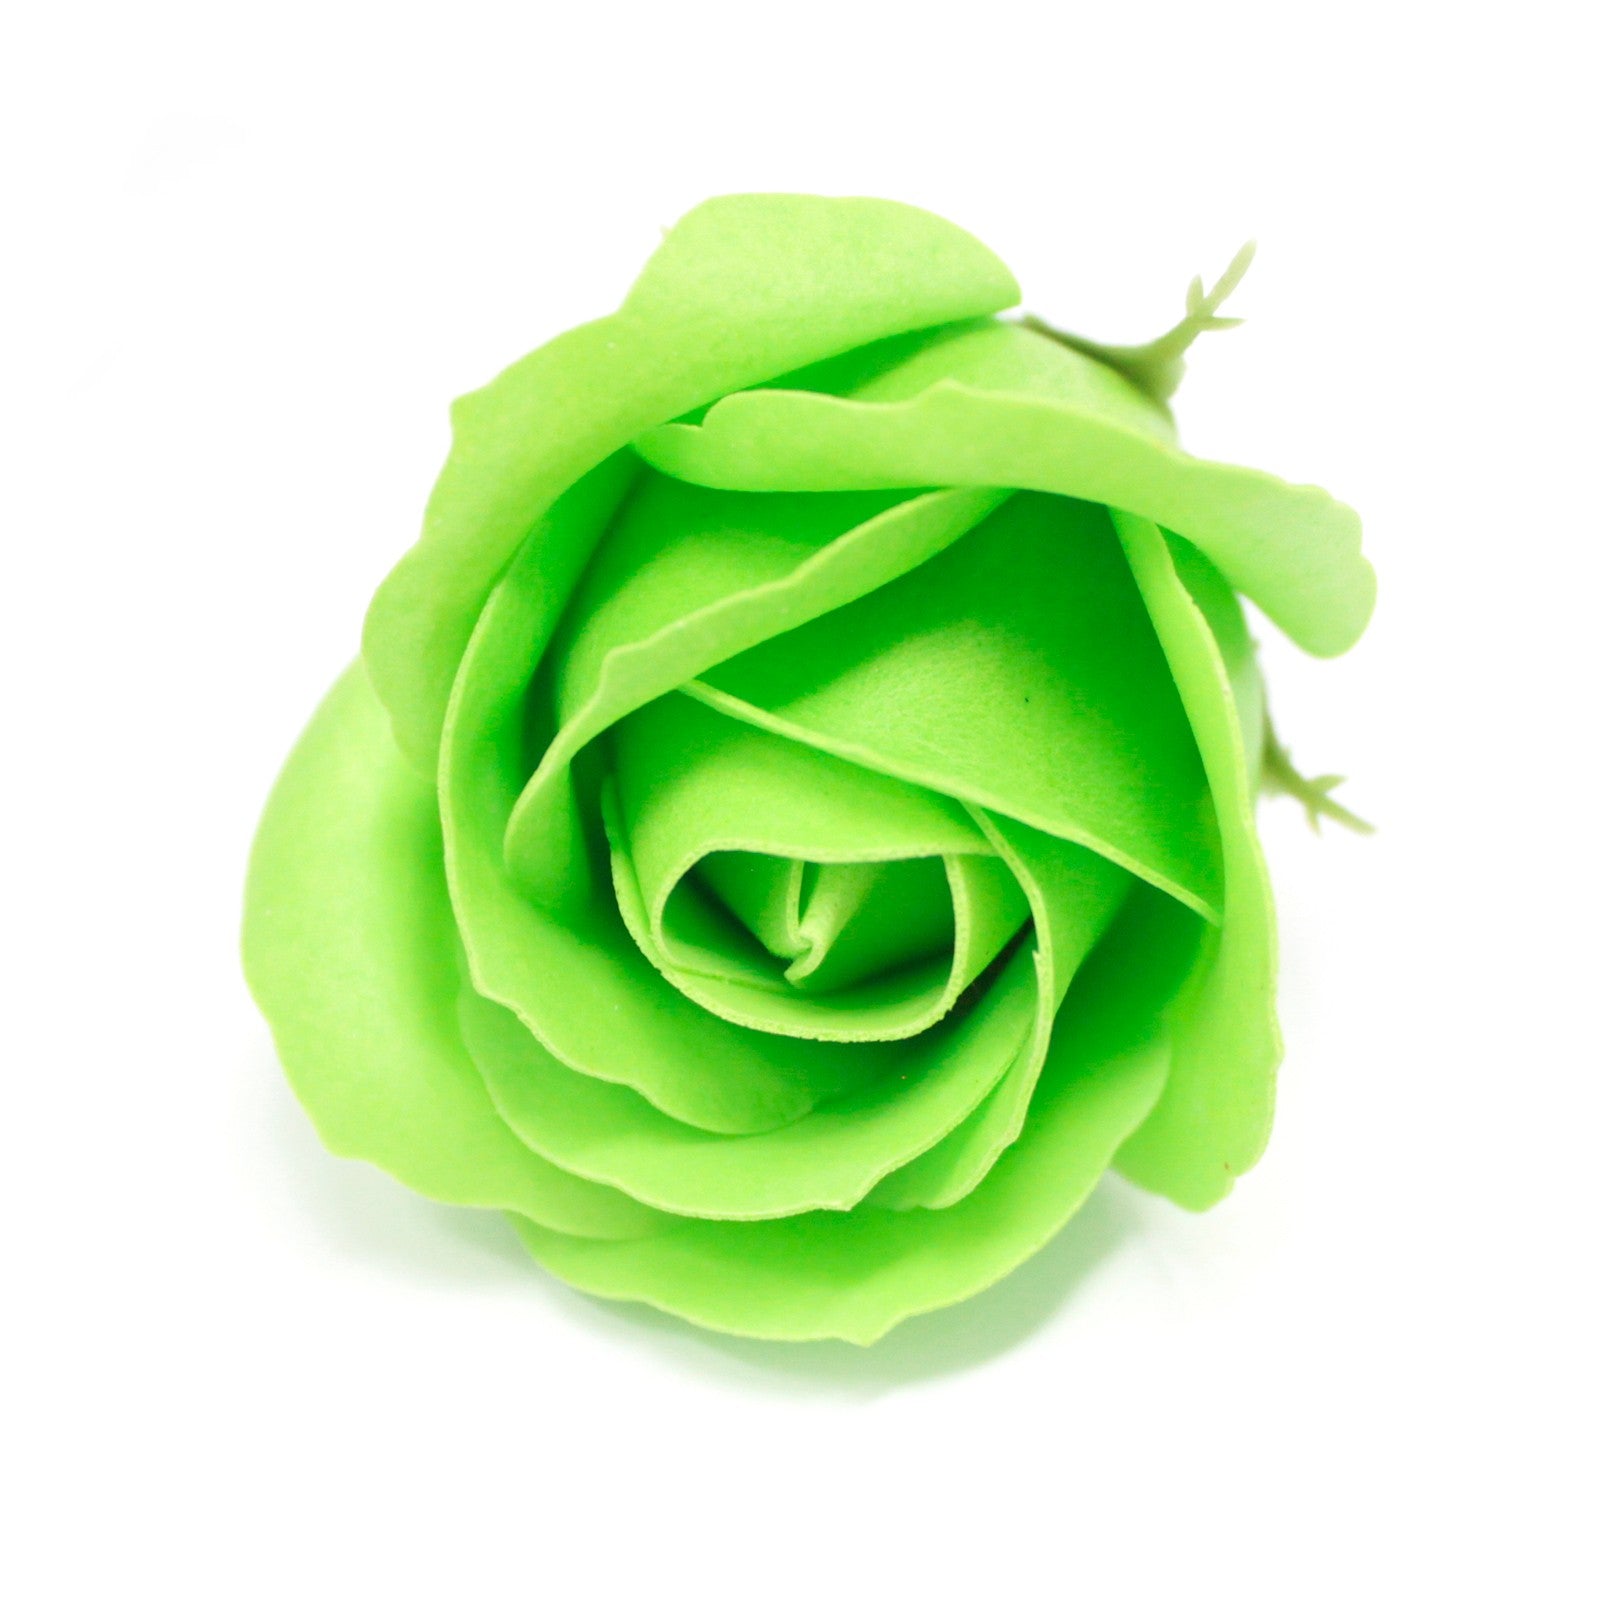 View Craft Soap Flowers Med Rose Green x 10 pcs information